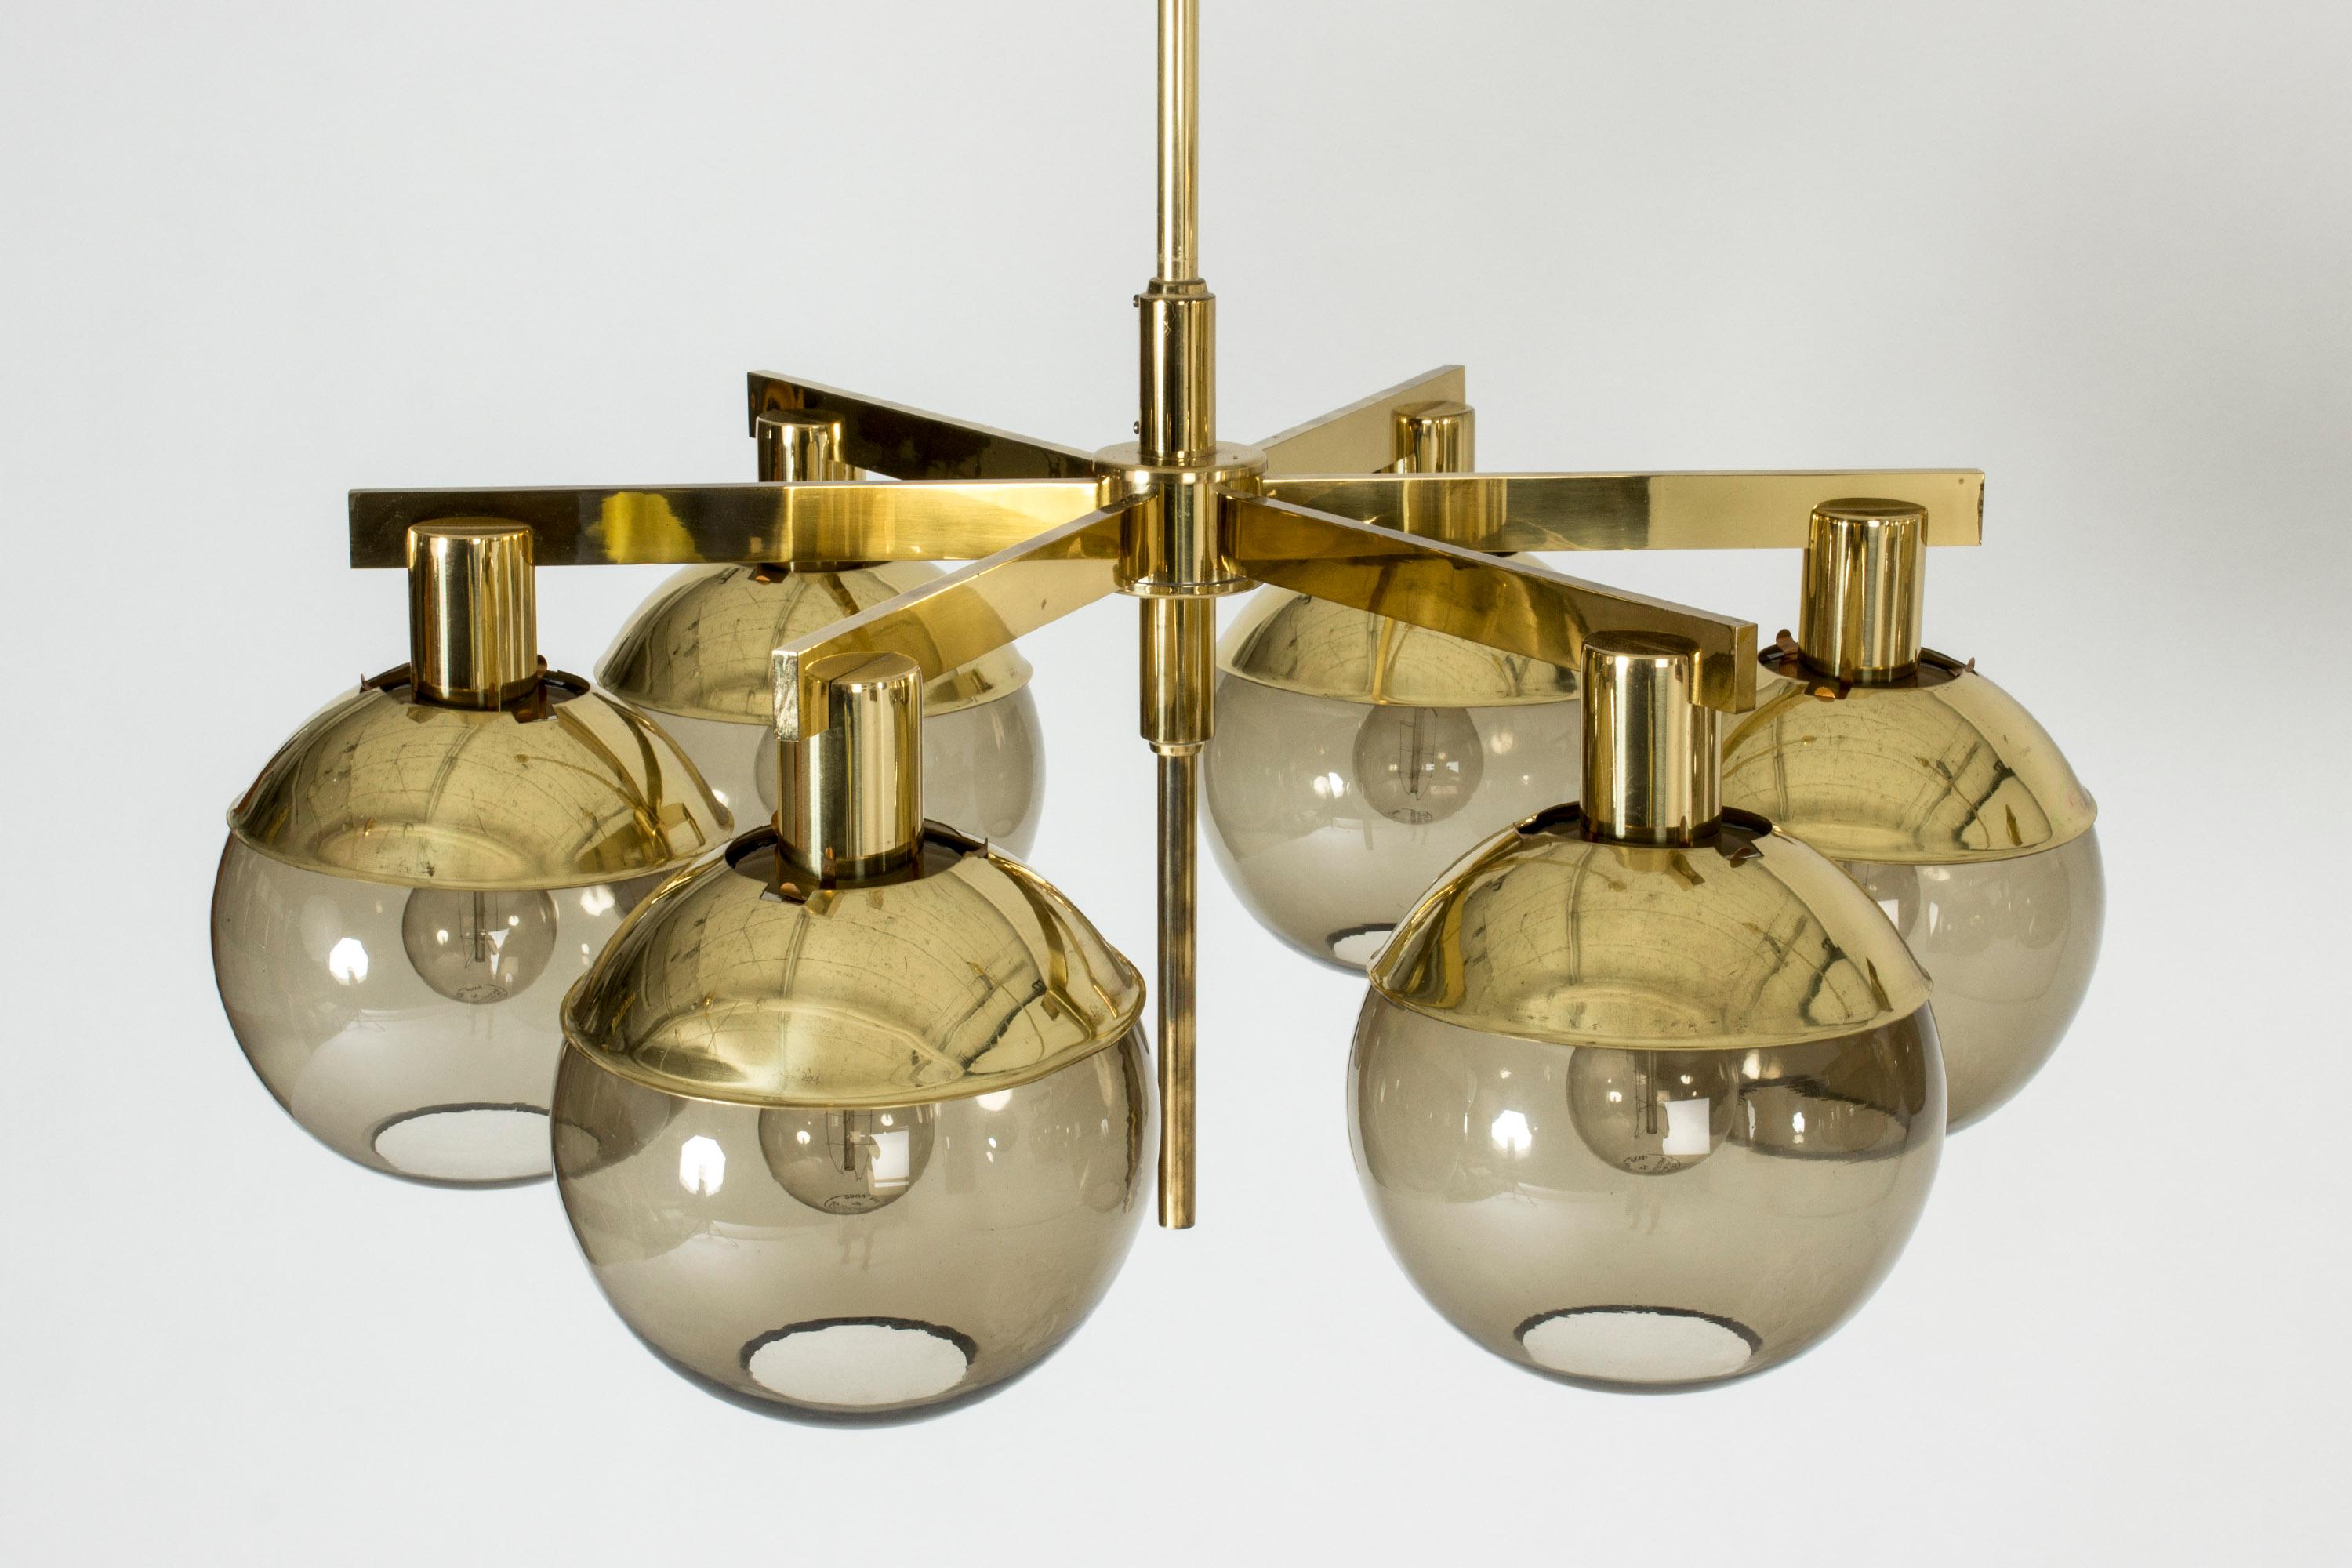 Scandinavian Modern Pair of Brass and Glass Chandeliers by Hans-Agne Jakobsson For Sale